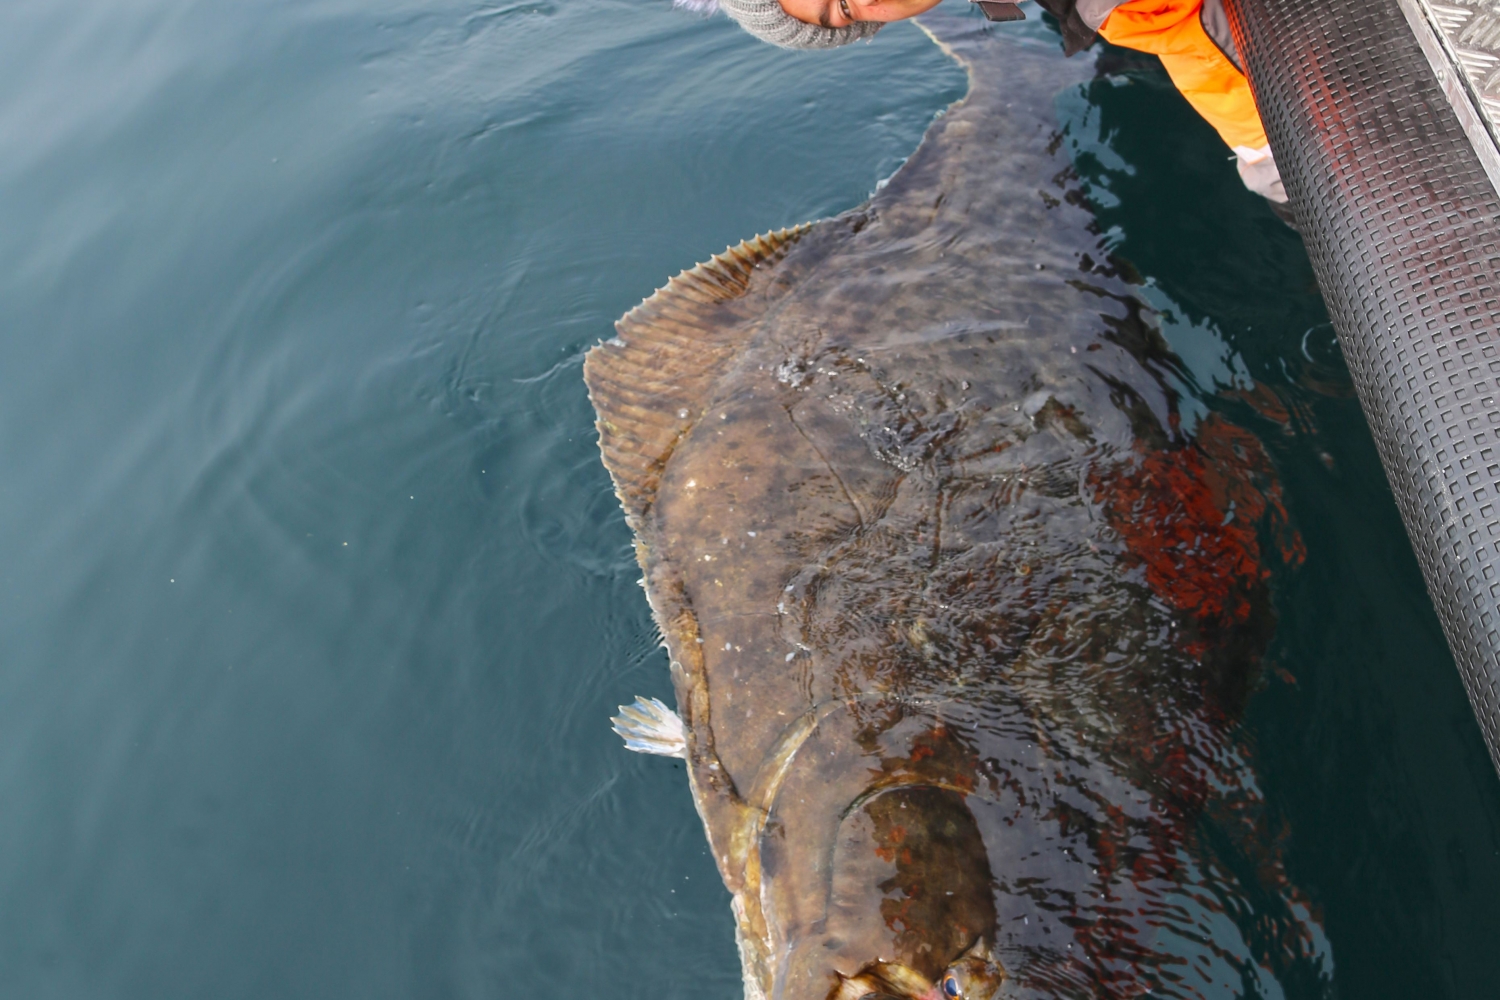 A halibut on the hook, coming up from the sea